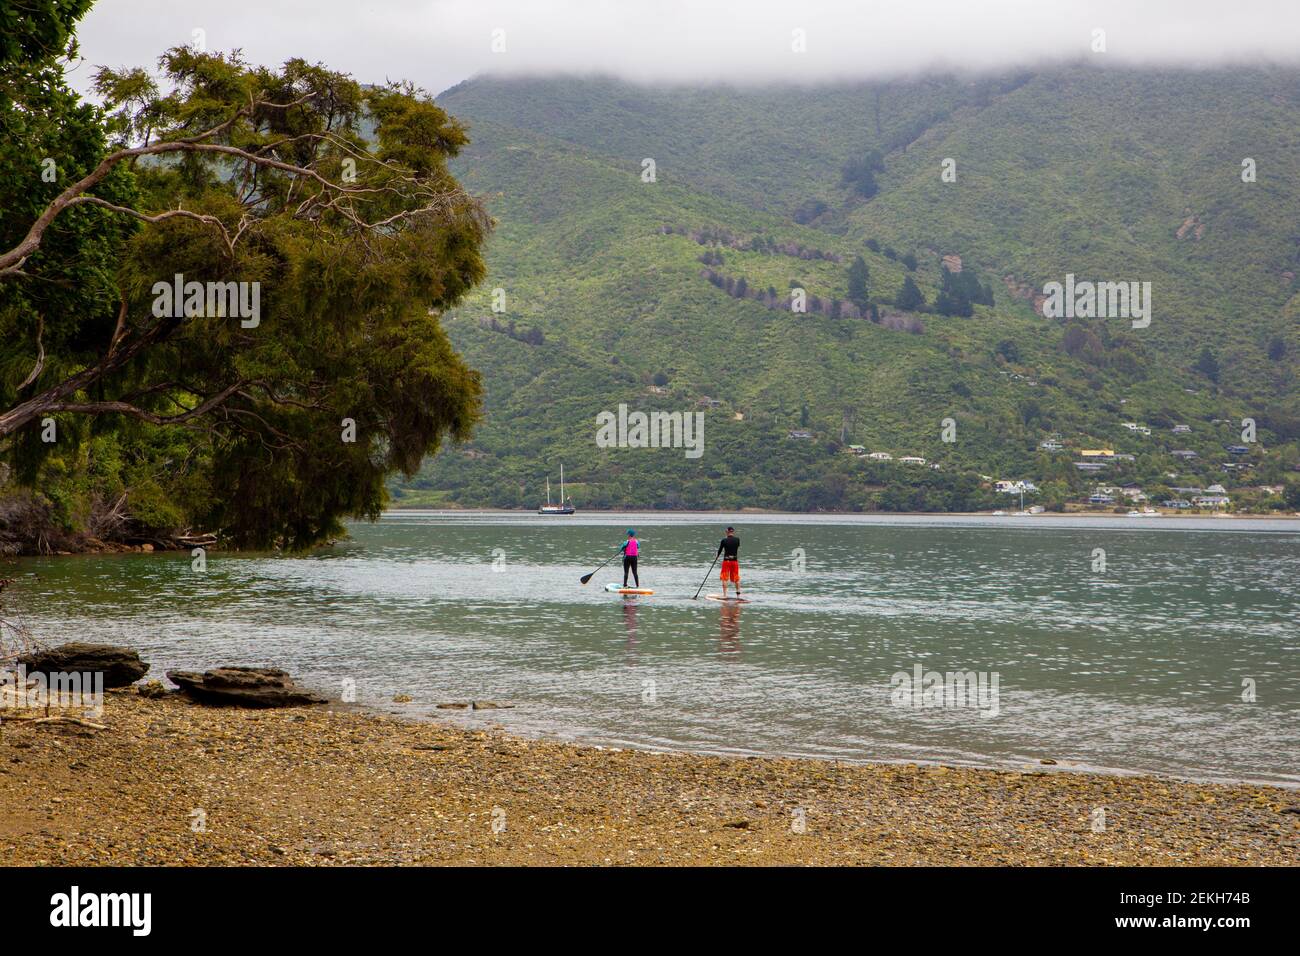 Paddle boarders make their way around the coastline on a calm summers day, Marlborough Sounds, New Zealand Stock Photo